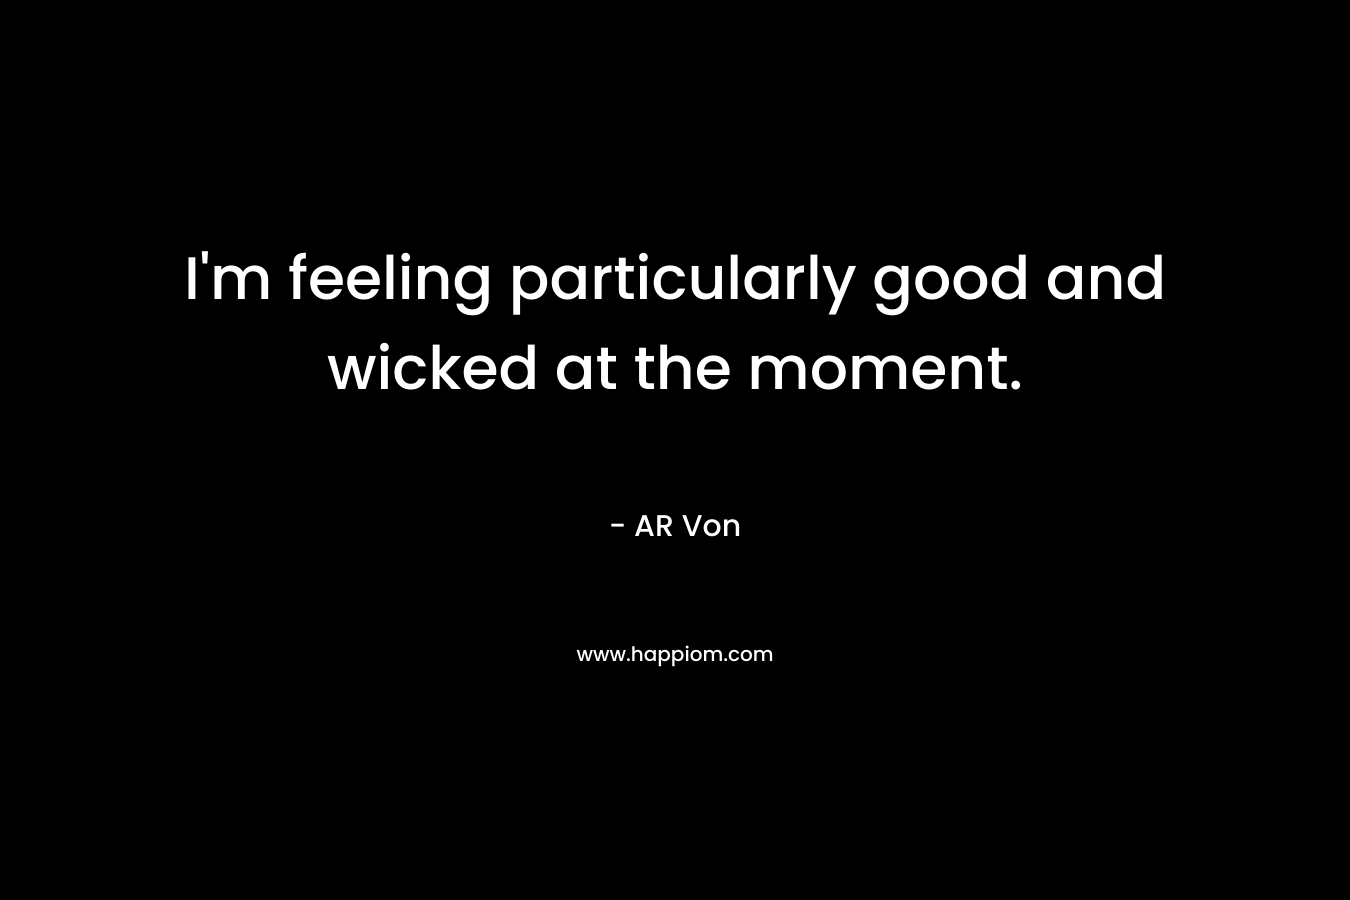 I’m feeling particularly good and wicked at the moment. – AR Von